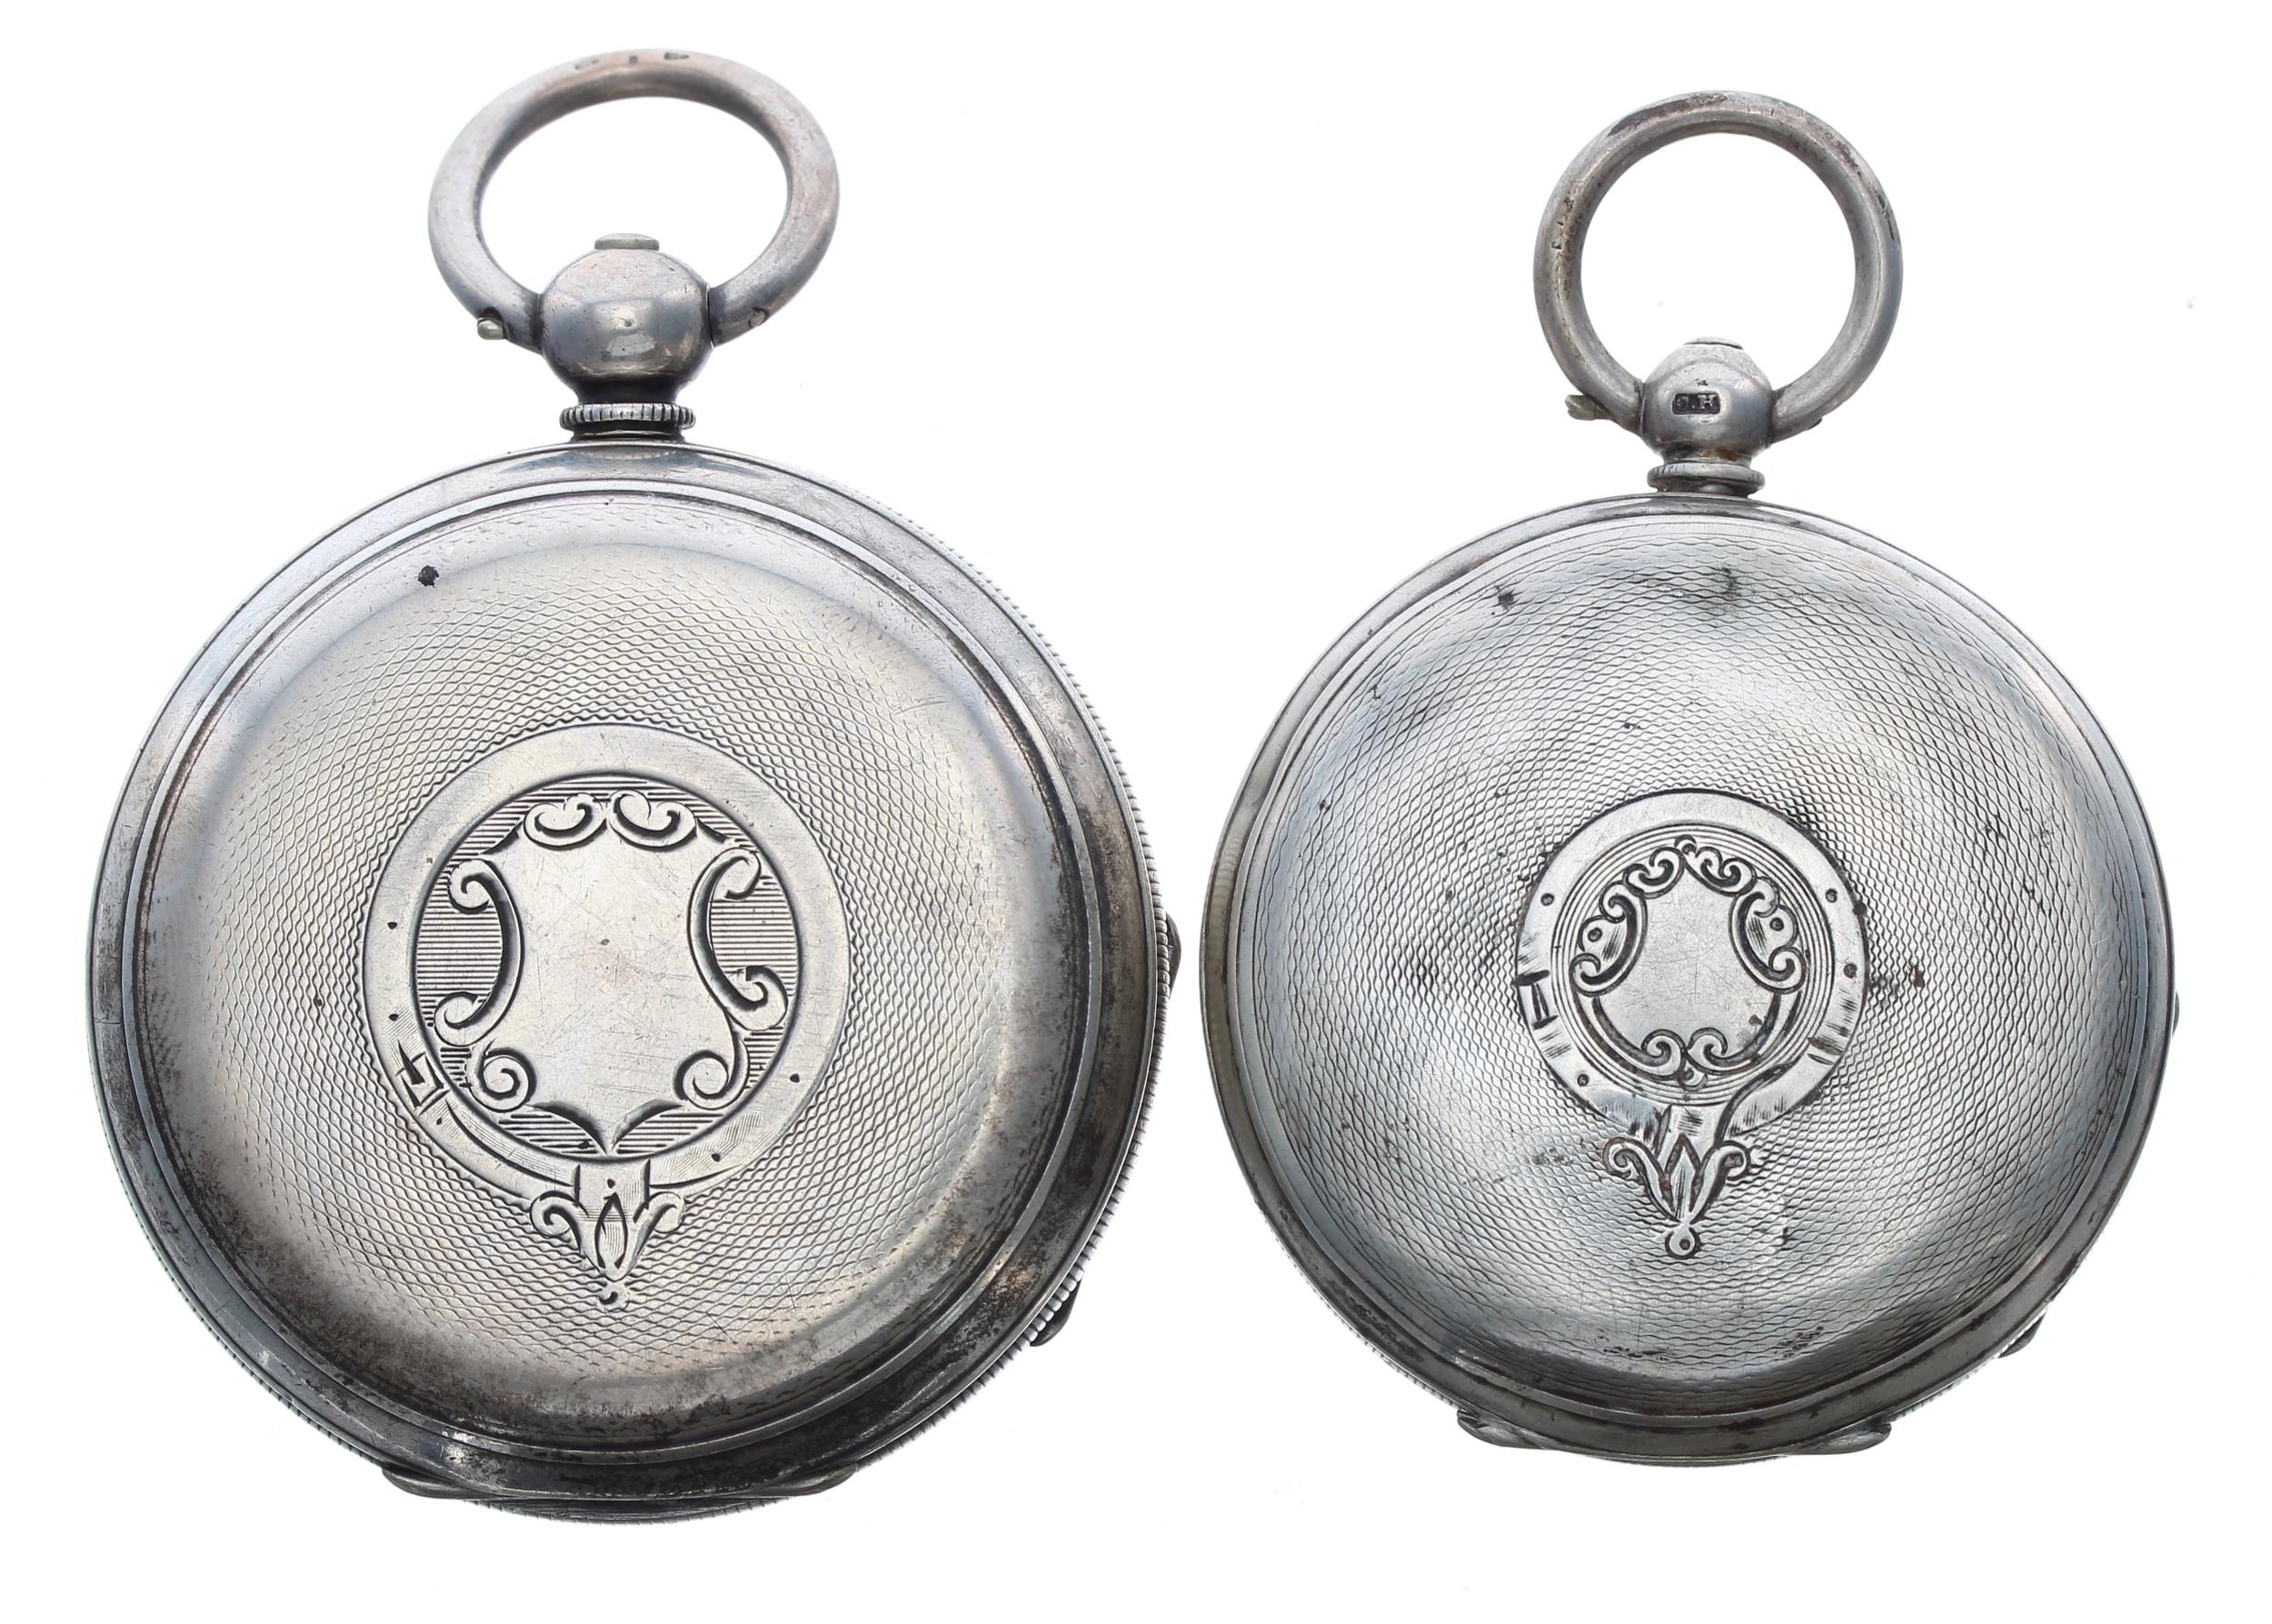 Silver (0.935) lever pocket watch, unsigned movement, no. 123487, with engraved balance cock, - Image 2 of 3